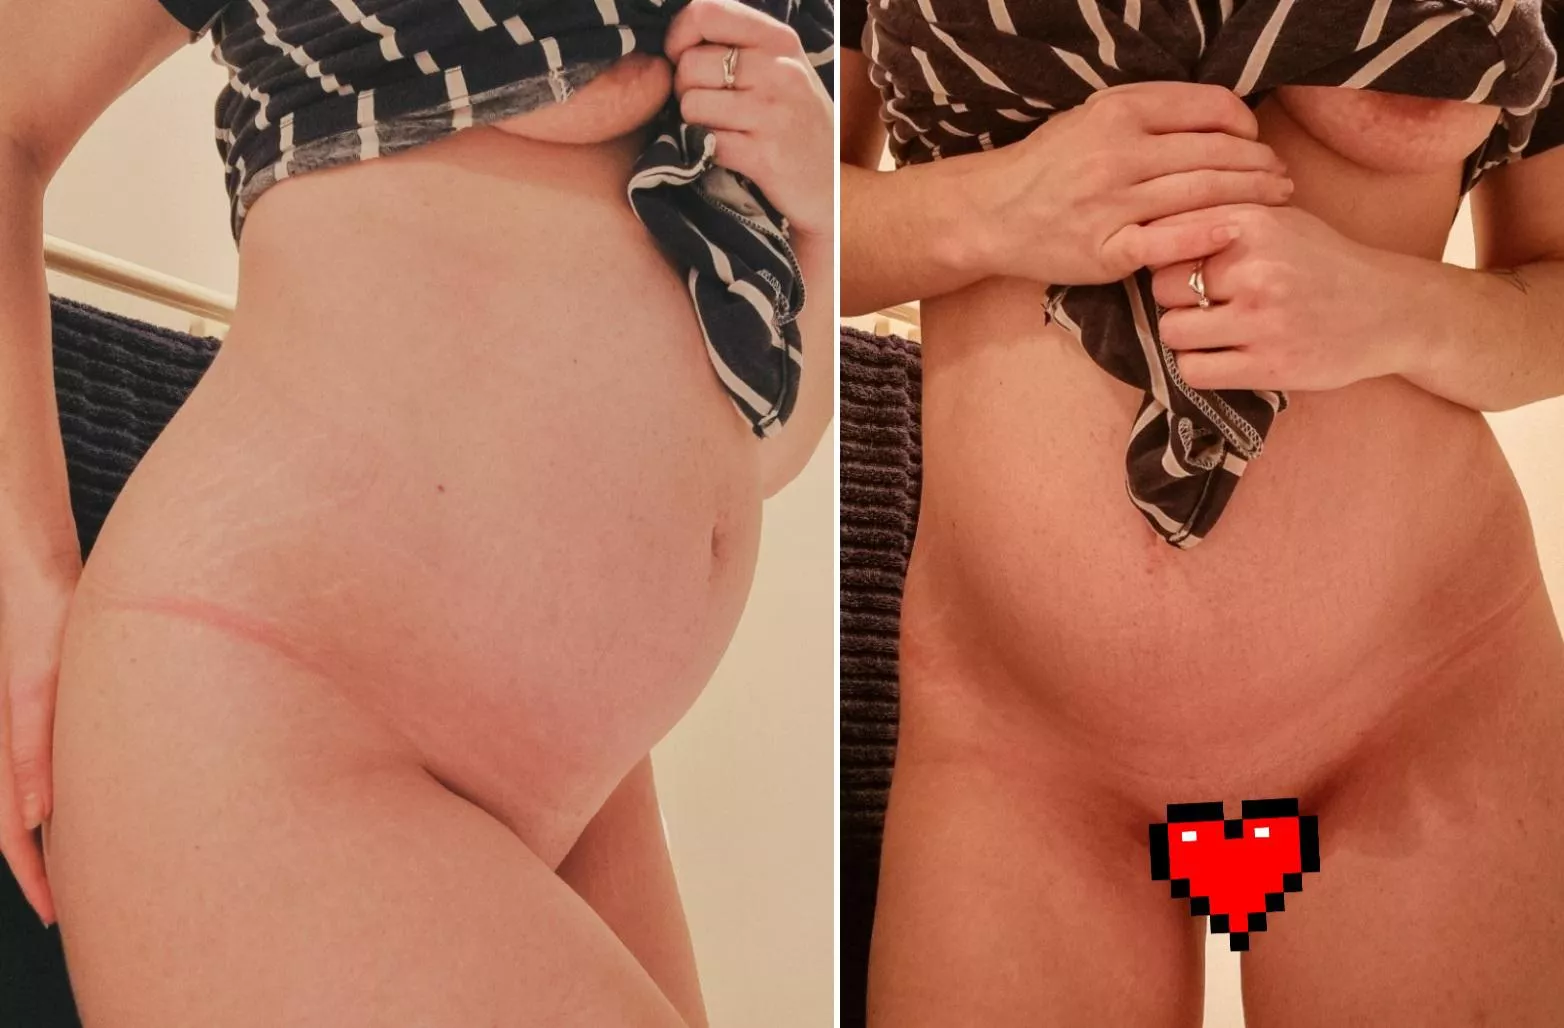 Pregnant Breast Growth Porn Gallery - Love my growing bump and bursting breasts. Australian FTM loving being  pregnant so far. nudes : pregnantporn | NUDE-PICS.ORG